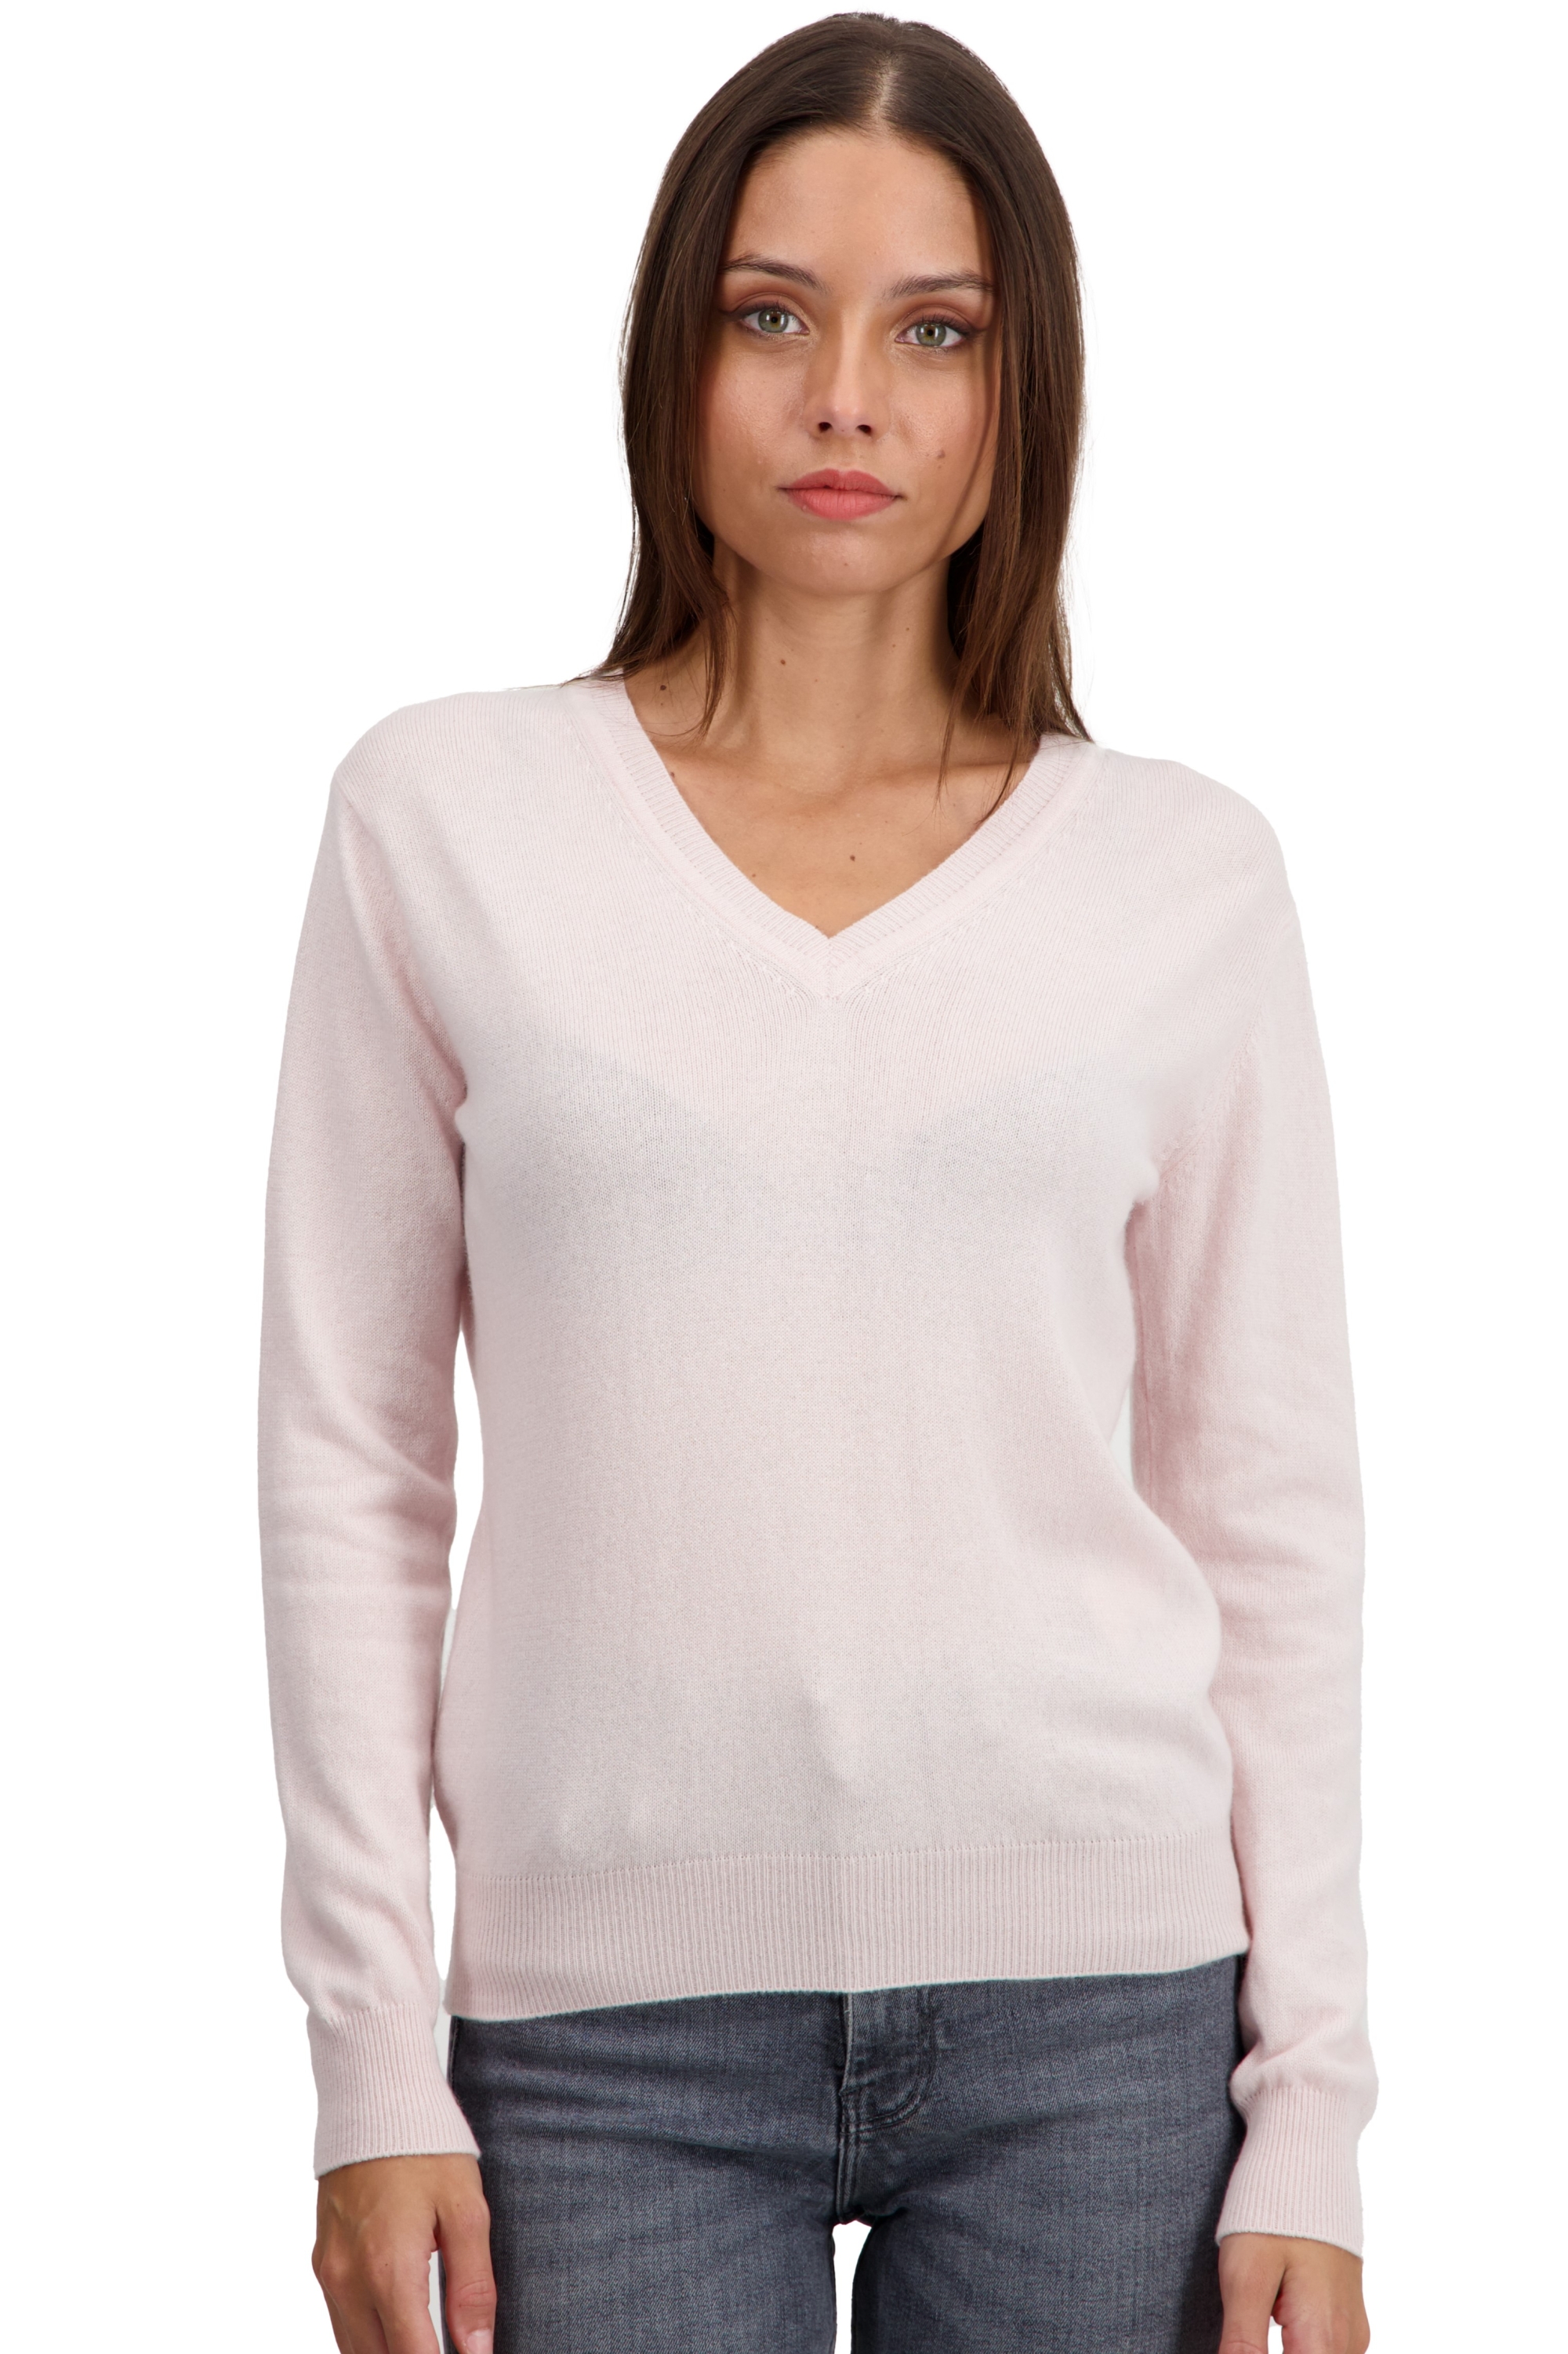 Cachemire pull femme faustine rose pale 4xl